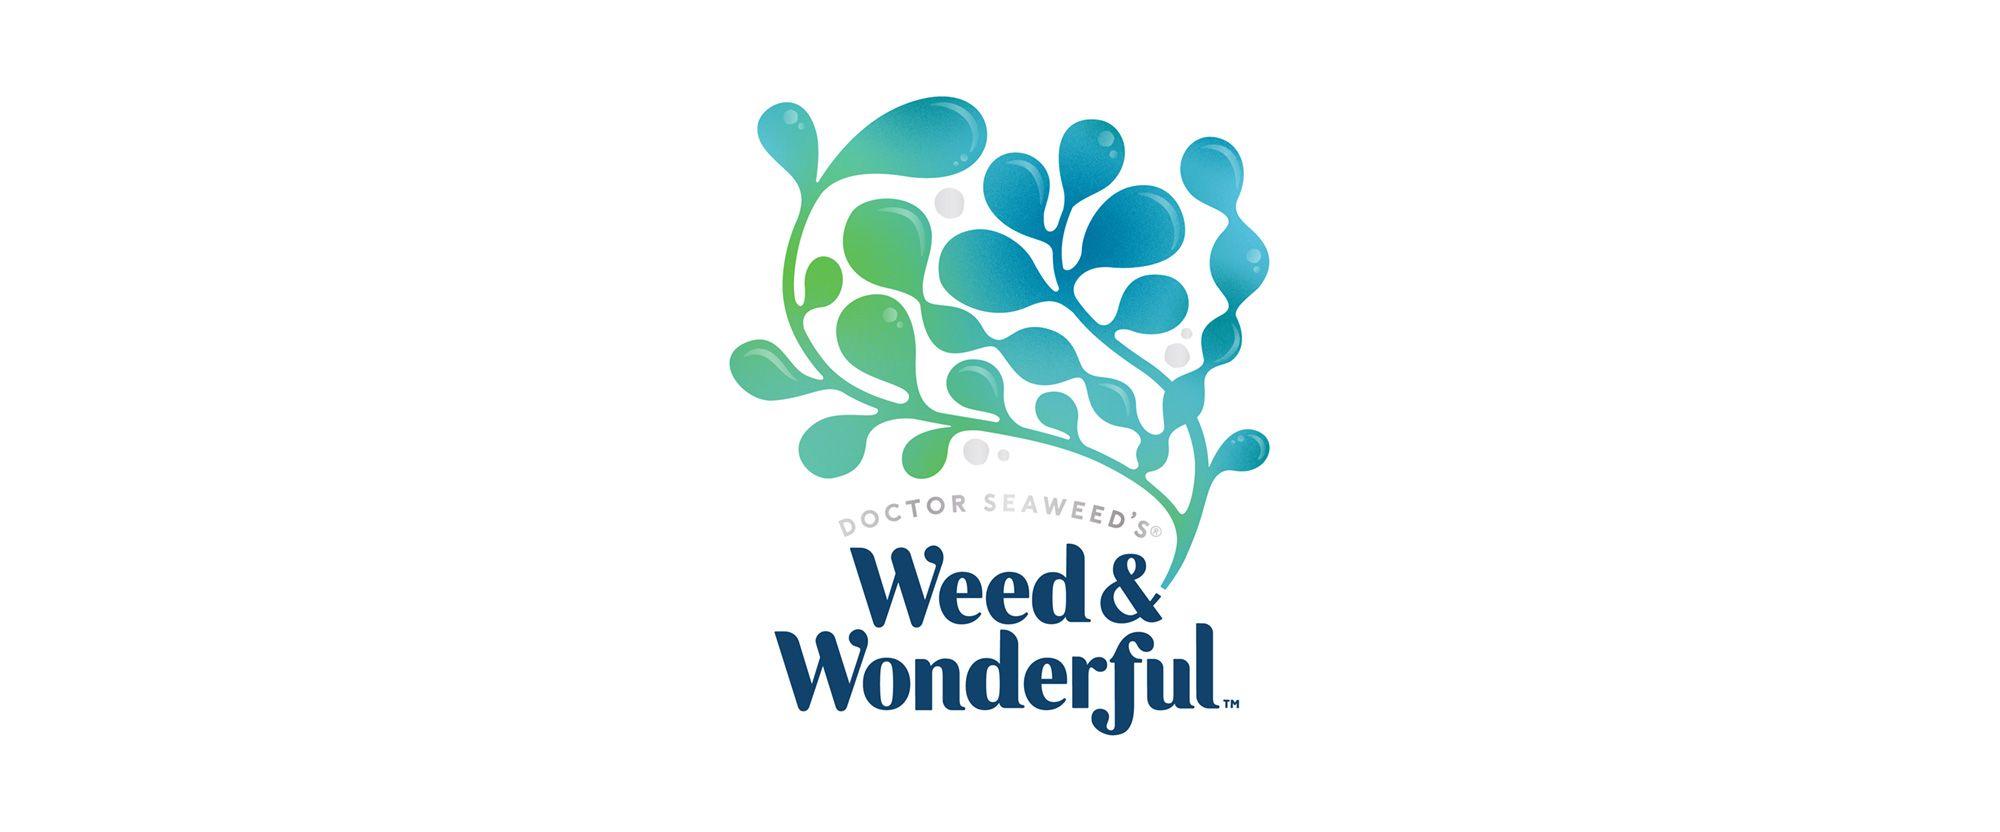 Wonderful Logo - Brand New: New Logo and Packaging for Weed & Wonderful